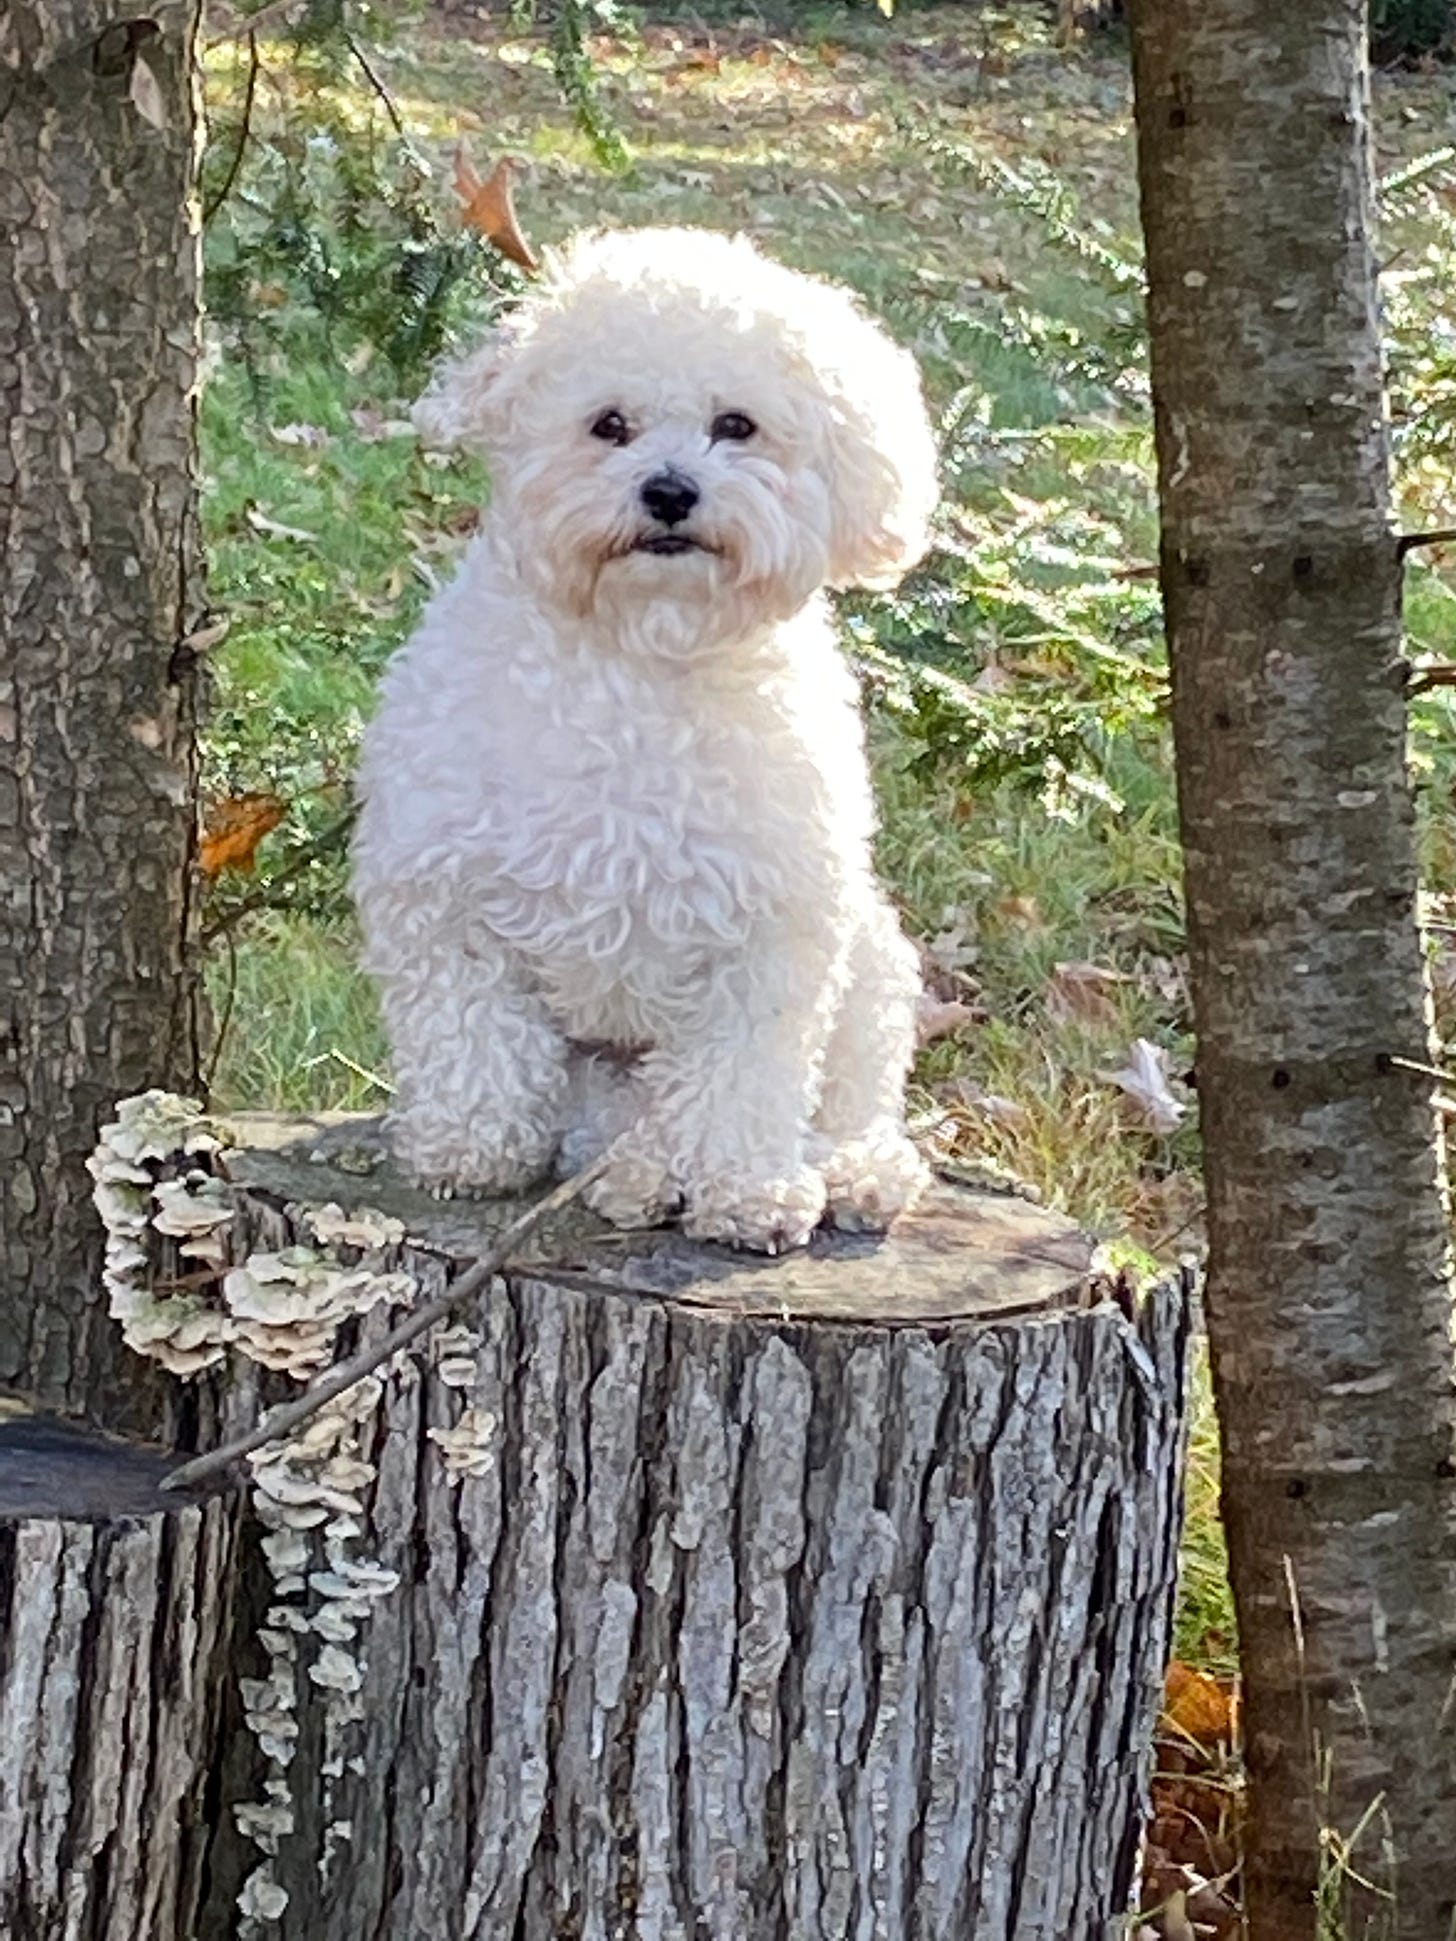 A very fluffy, small white dog sits on a tree stump outside. Behind him are tree trunks and green branches on grass.